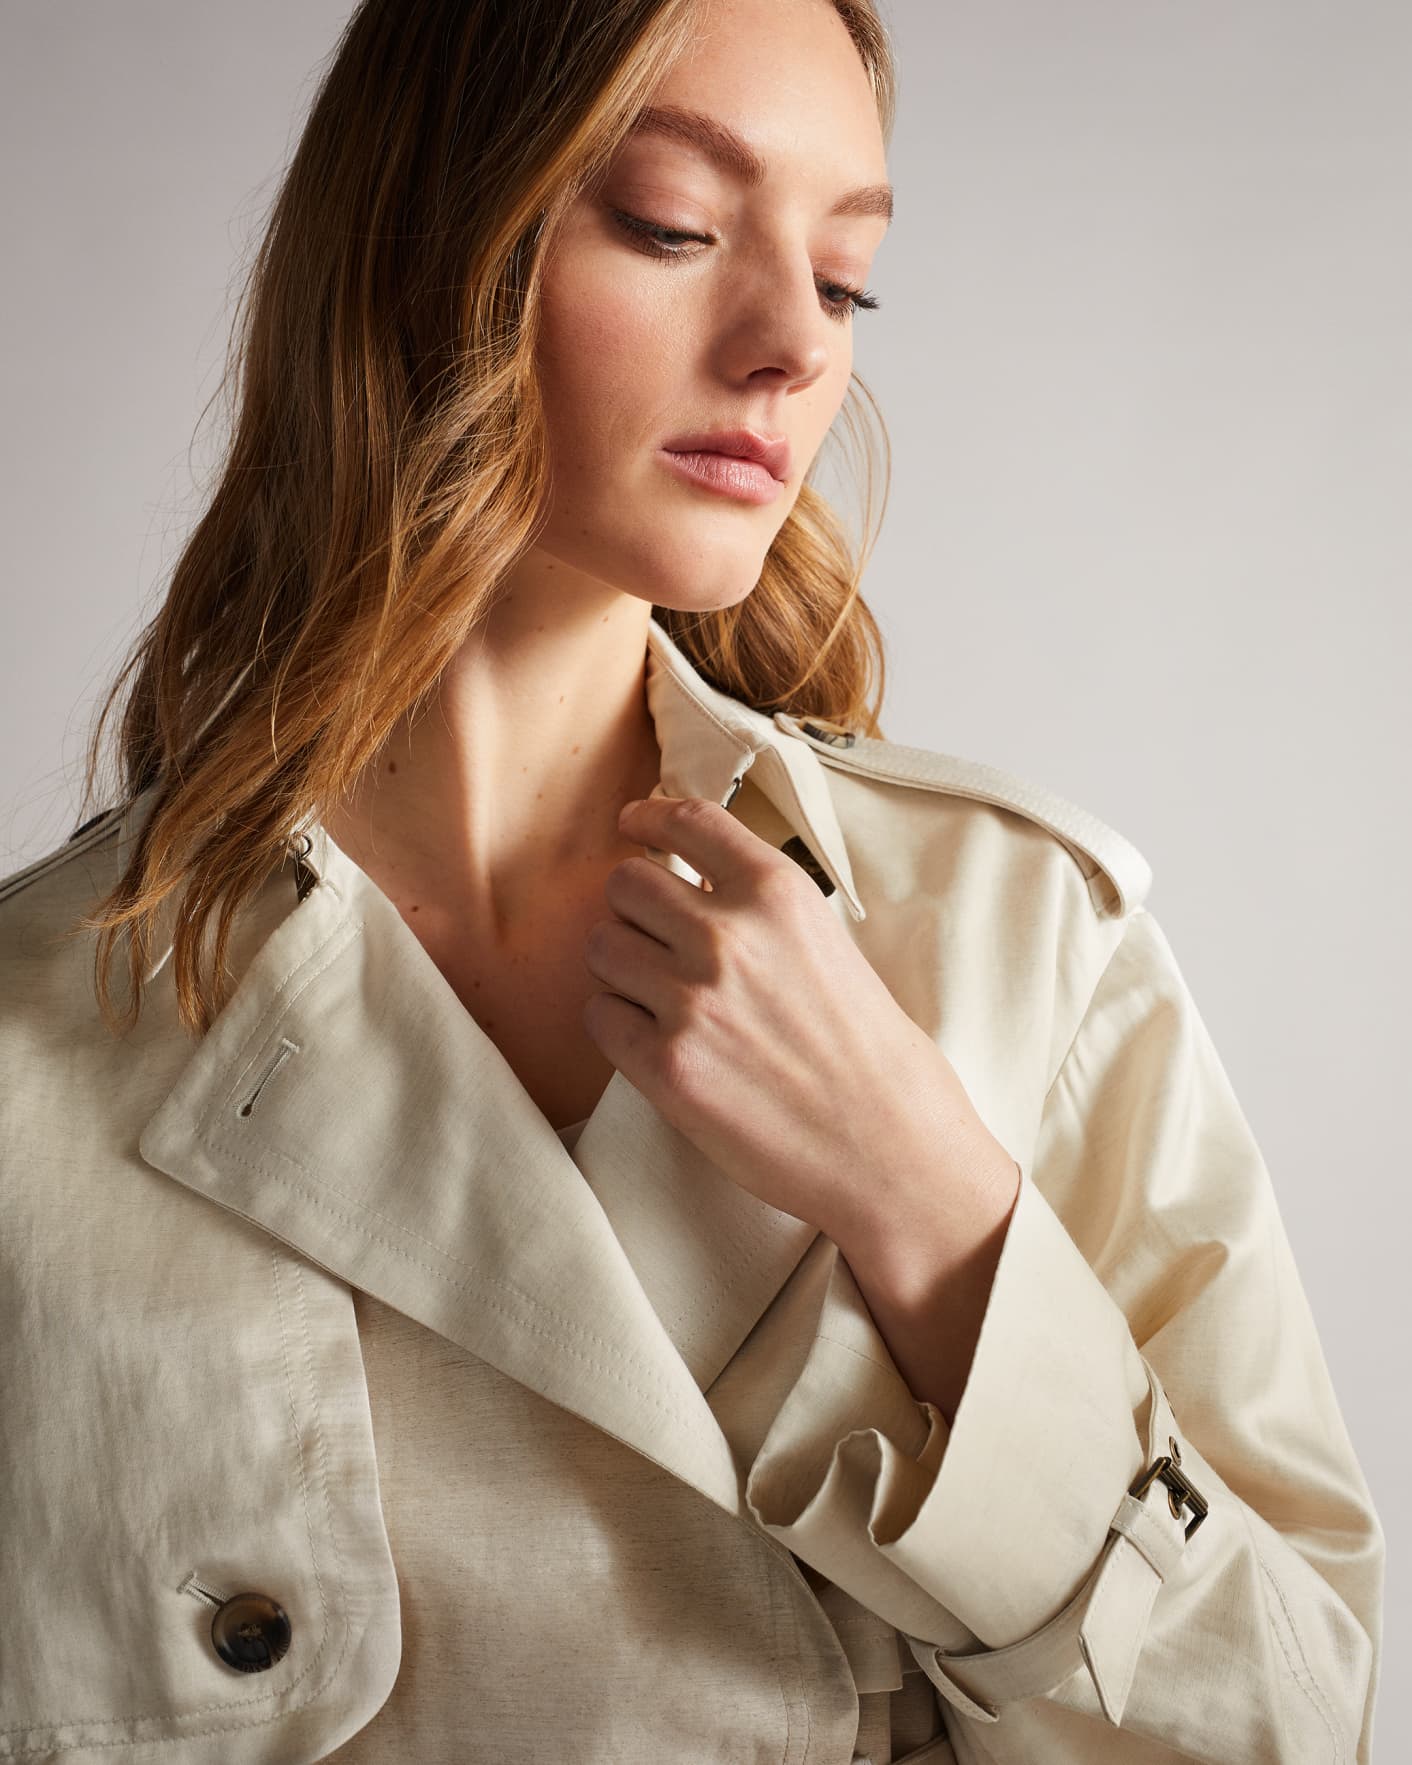 Natural Contrast Trench Coat Ted Baker